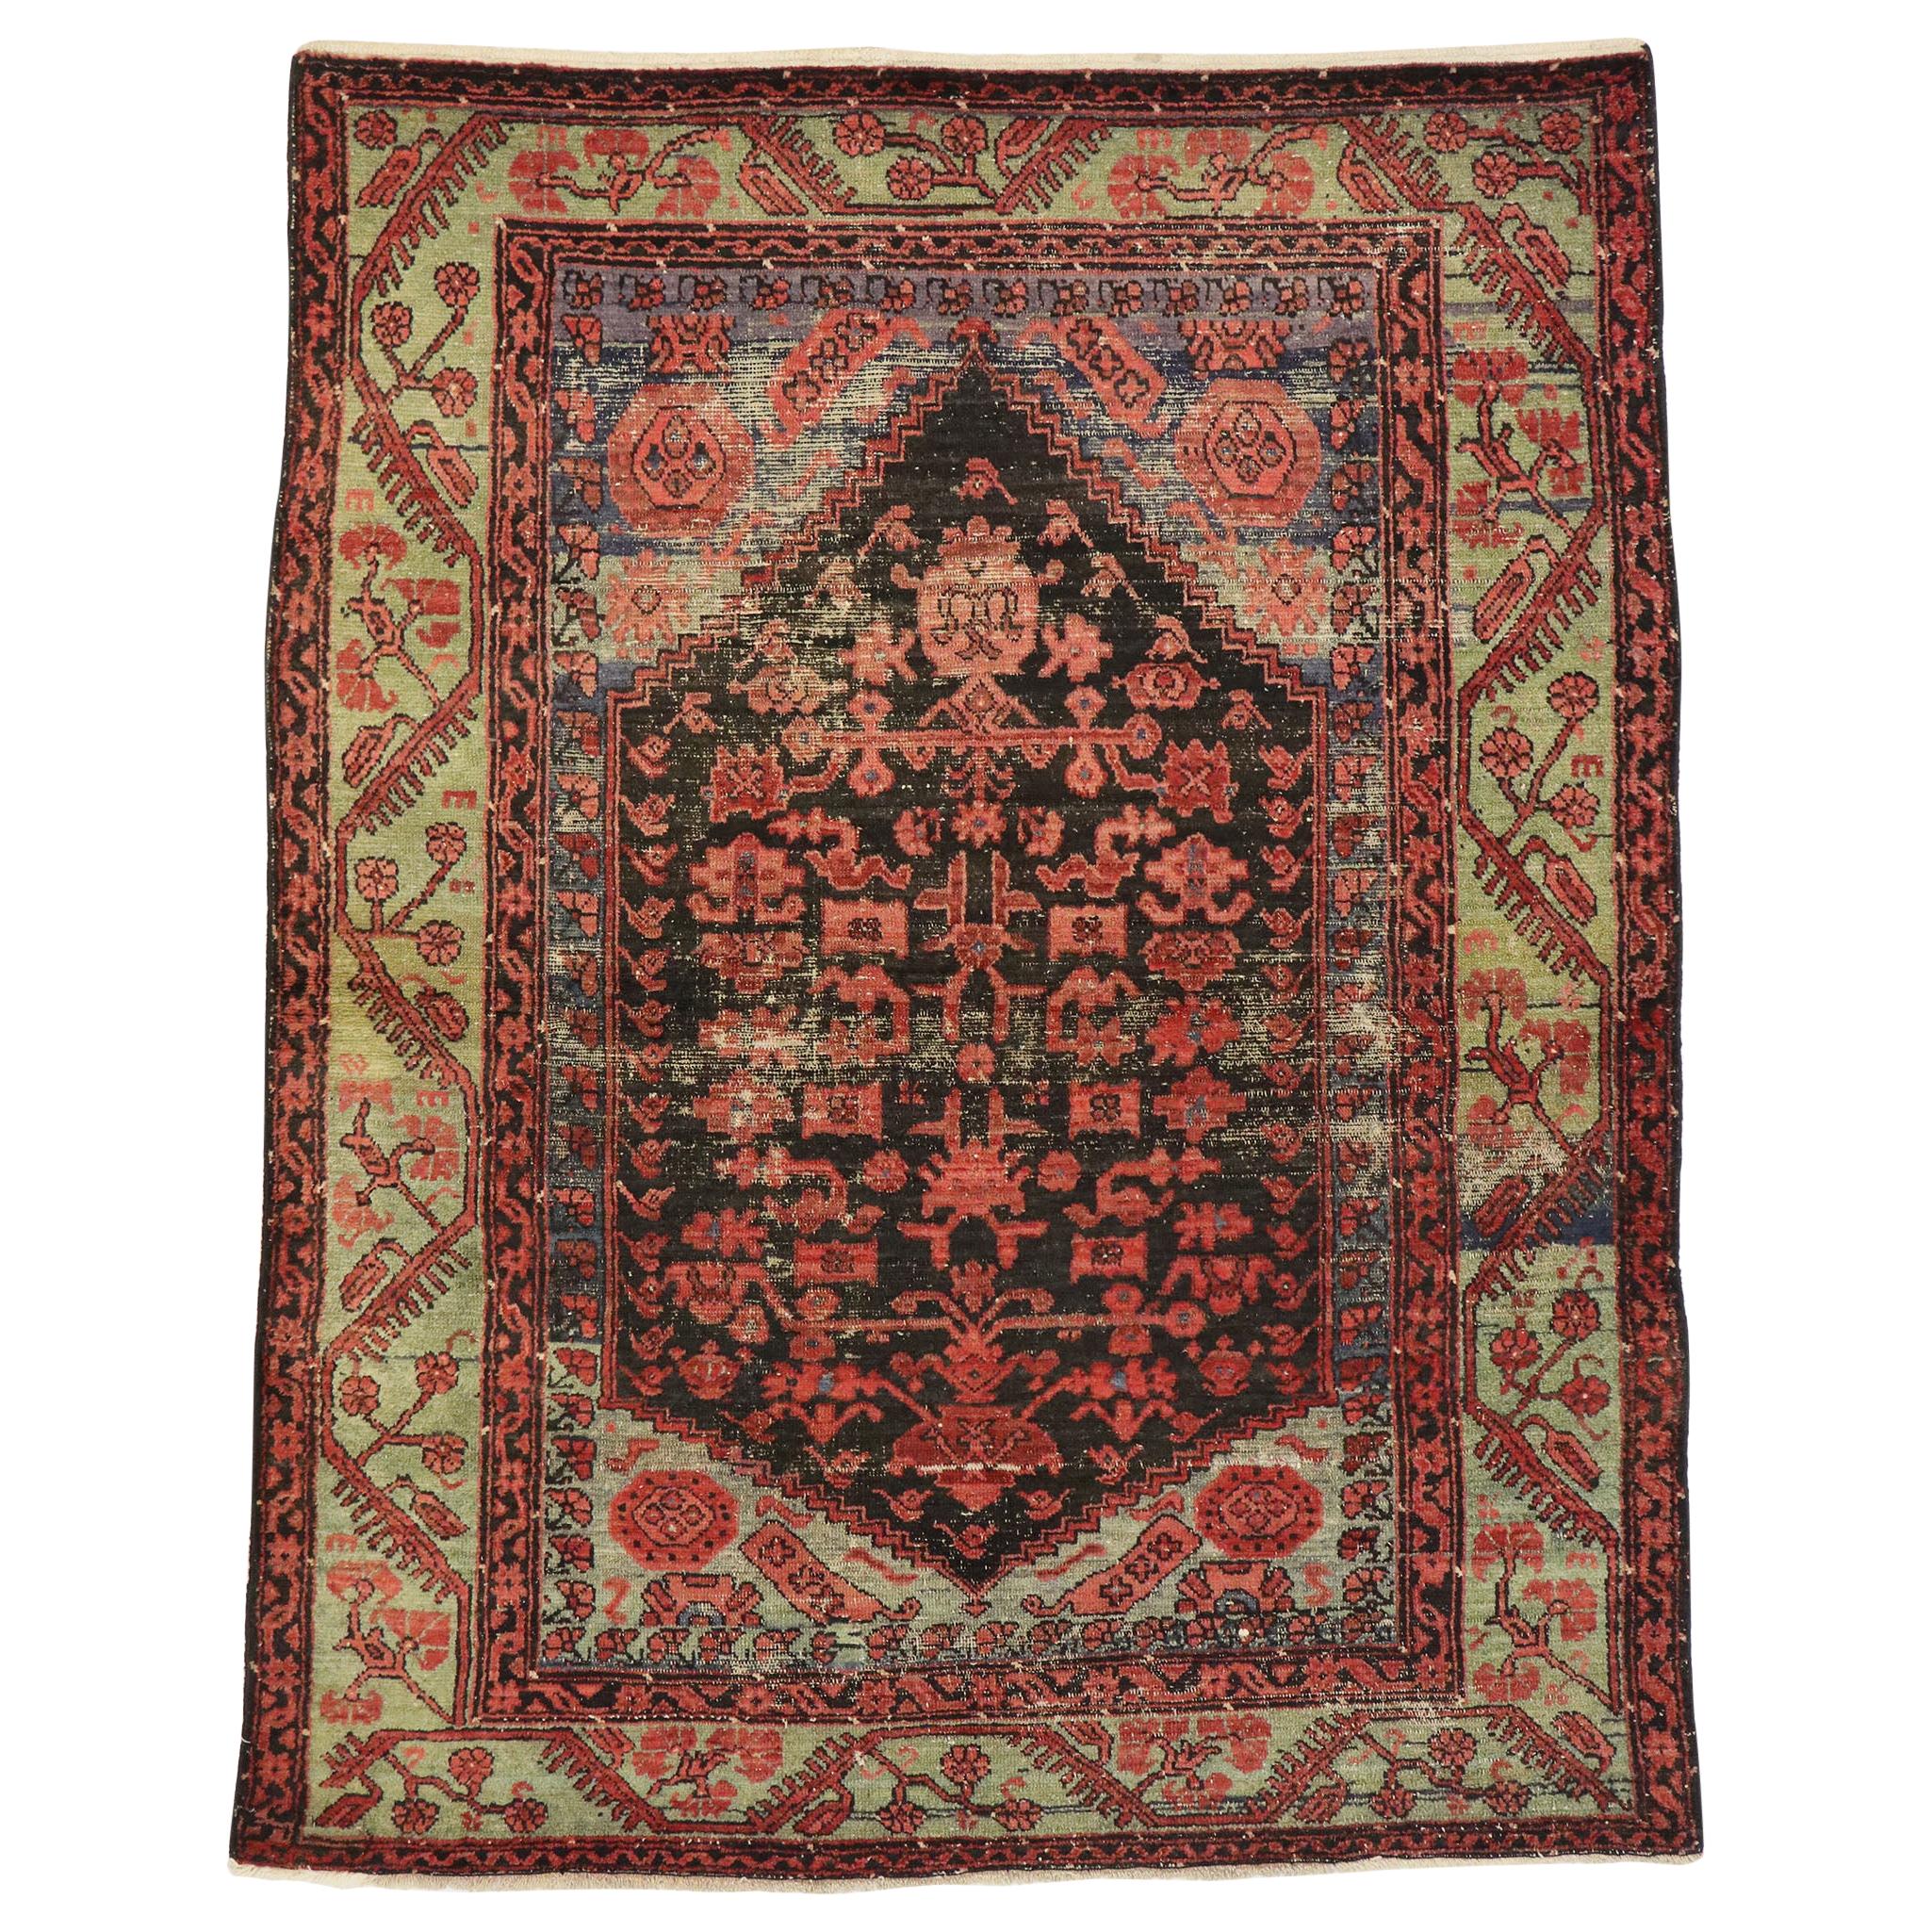 Distressed Vintage Turkish Oushak Rug with Modern Rustic Industrial Style